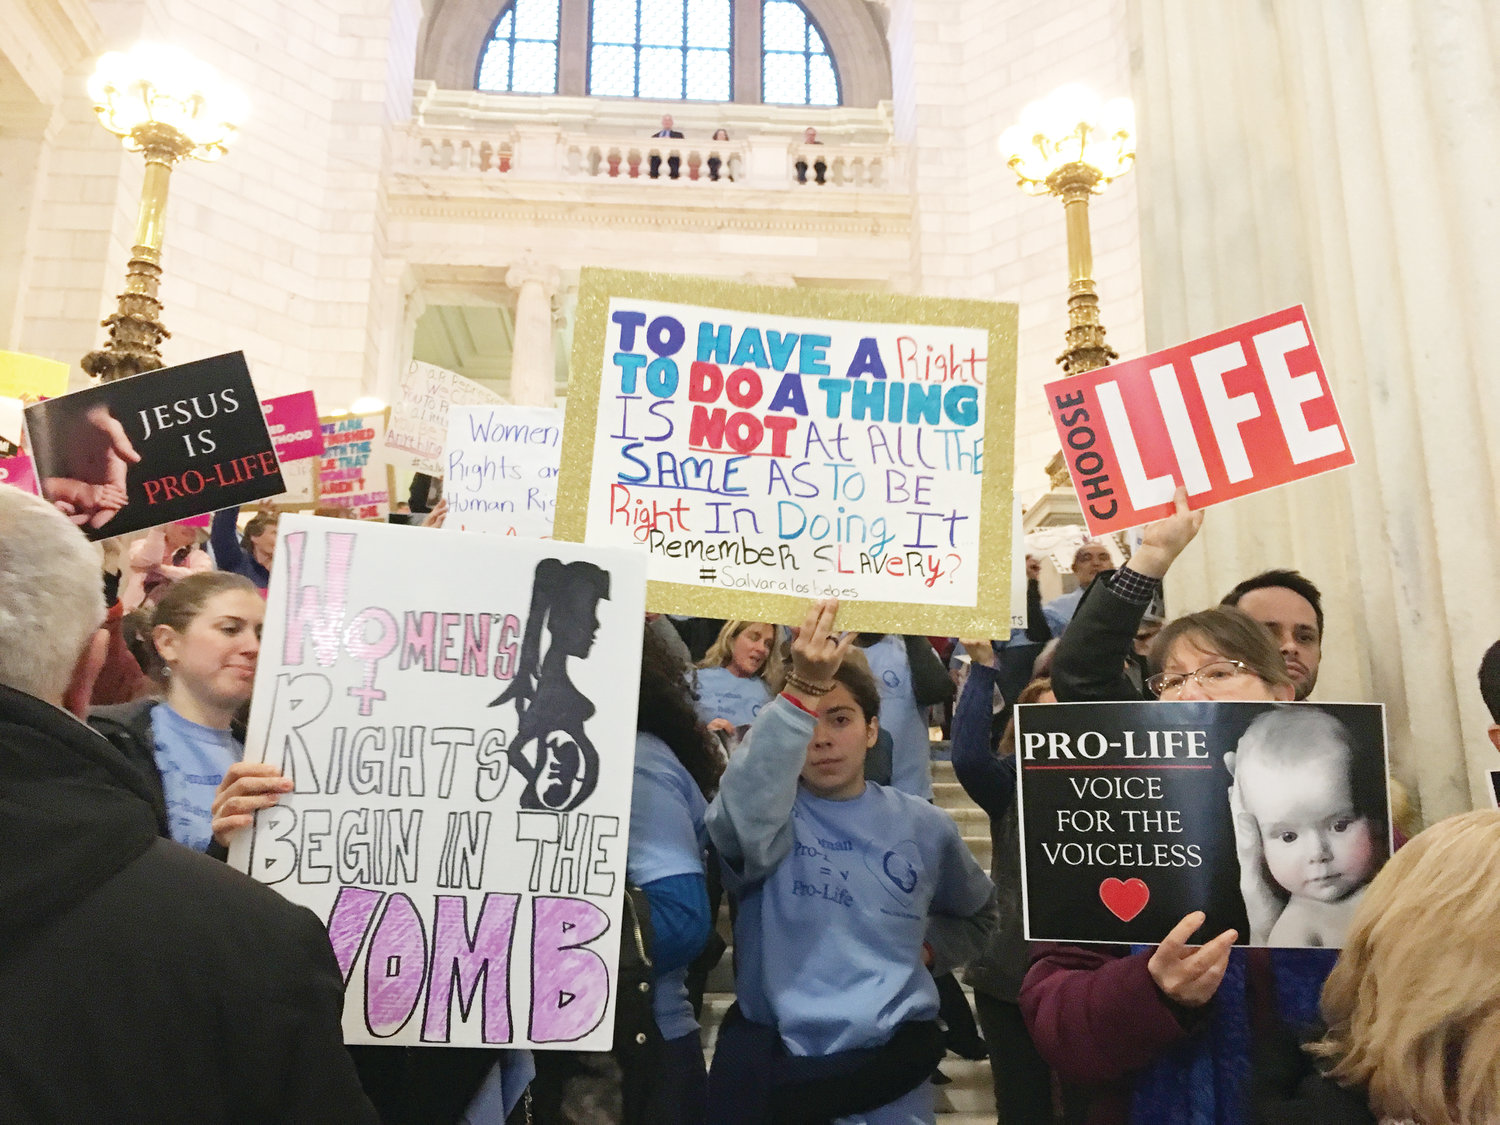 Pro-life activists gathered at the Rhode Island State House on Jan. 29 to demonstrate their opposition to legislation that would codify Roe v. Wade into state law while doing away with all restrictions on abortion, including the state’s ban on partial-birth abortion.